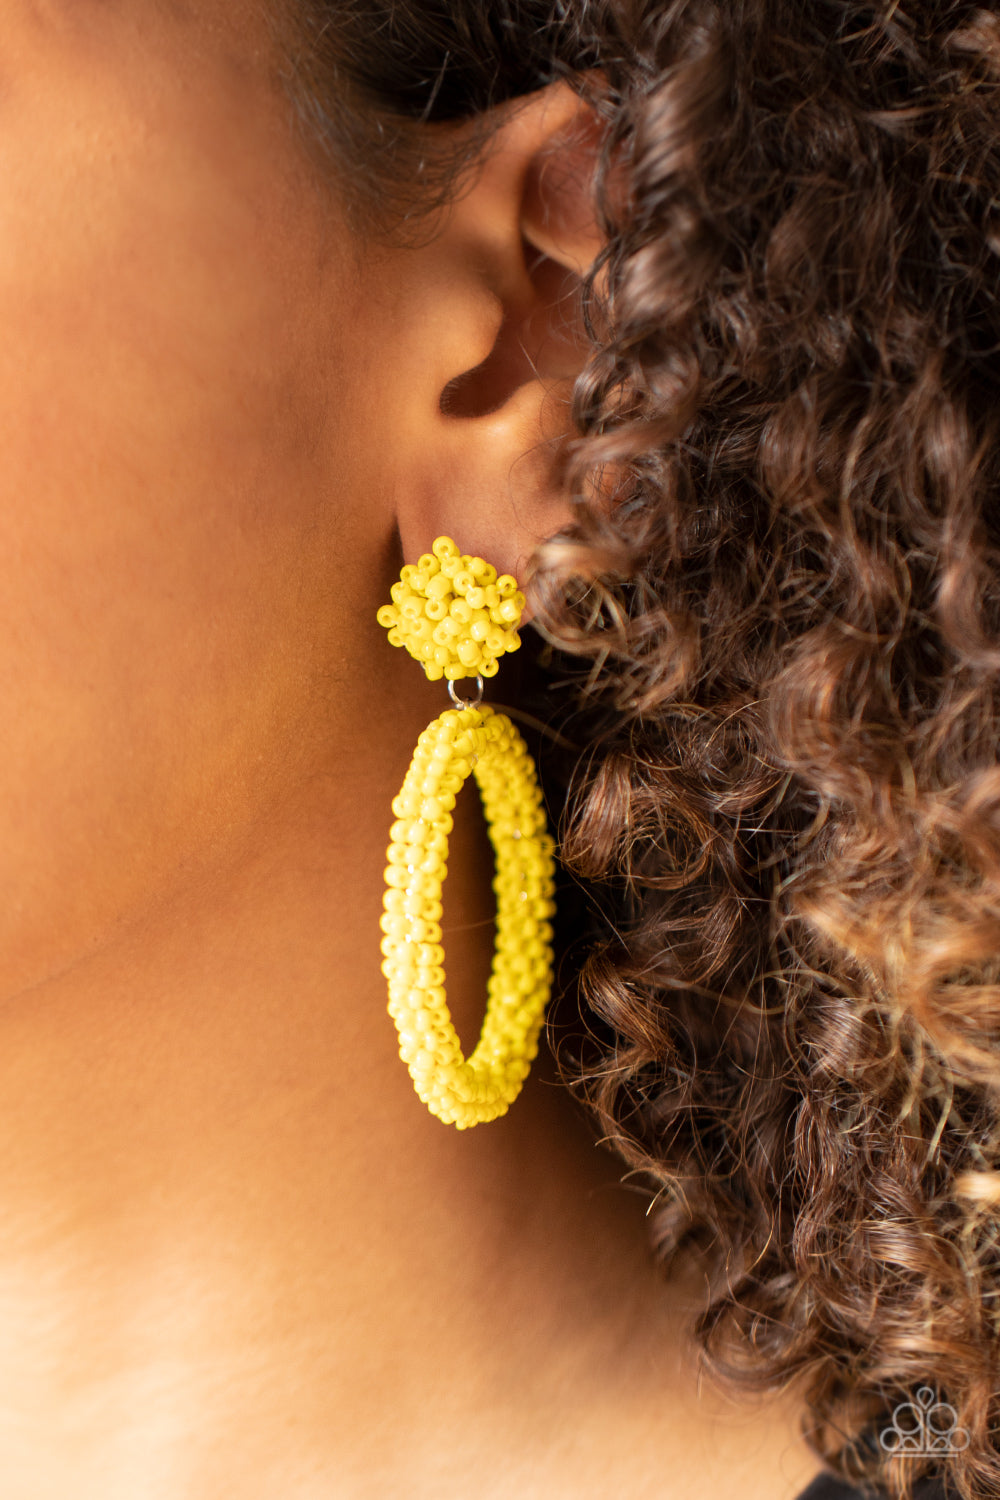 Paparazzi Be All You Can BEAD - Yellow Earrings - A Finishing Touch Jewelry Paparazzi jewelry images